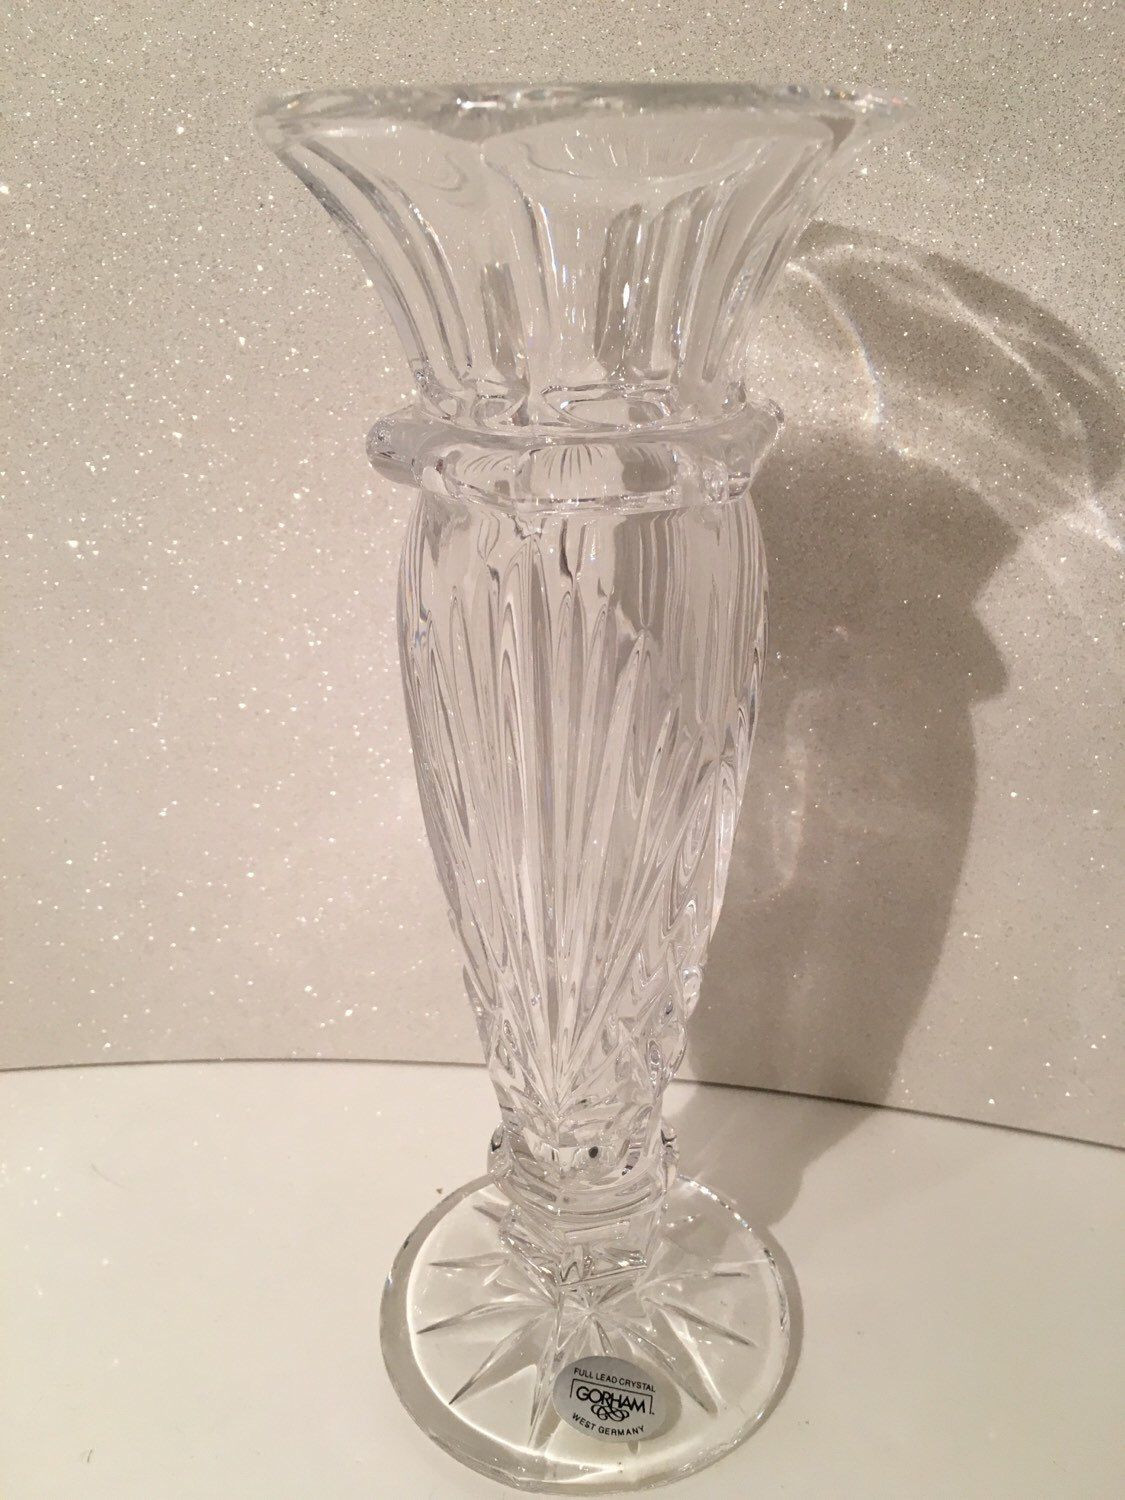 19 Fantastic Small Crystal Vase 2022 free download small crystal vase of a personal favorite from my etsy shop https www etsy com listing intended for a personal favorite from my etsy shop https www etsy com listing 260337454 vintage gorham 